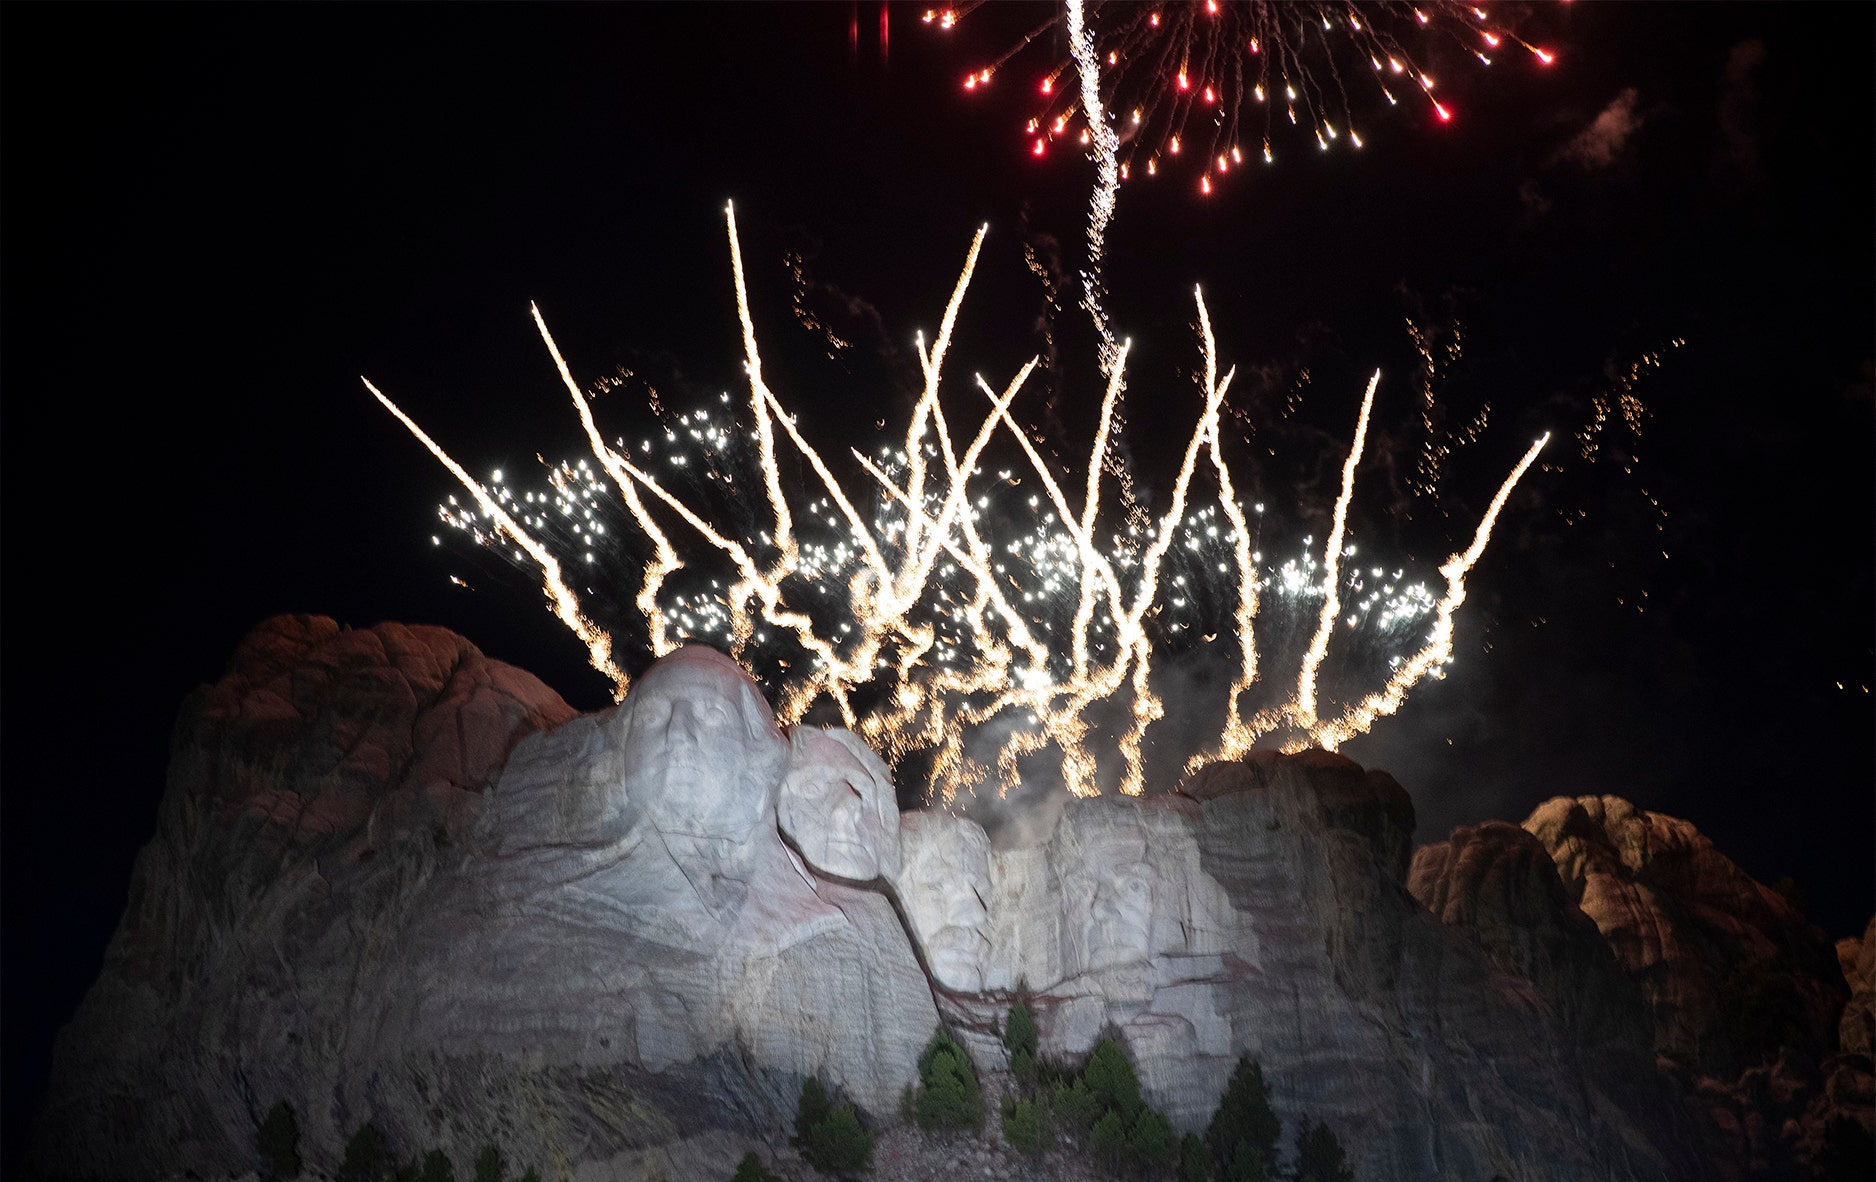 South Dakota Gov. Noem vows legal battle to get Mt. Rushmore July 4th fireworks reinstated for 2022